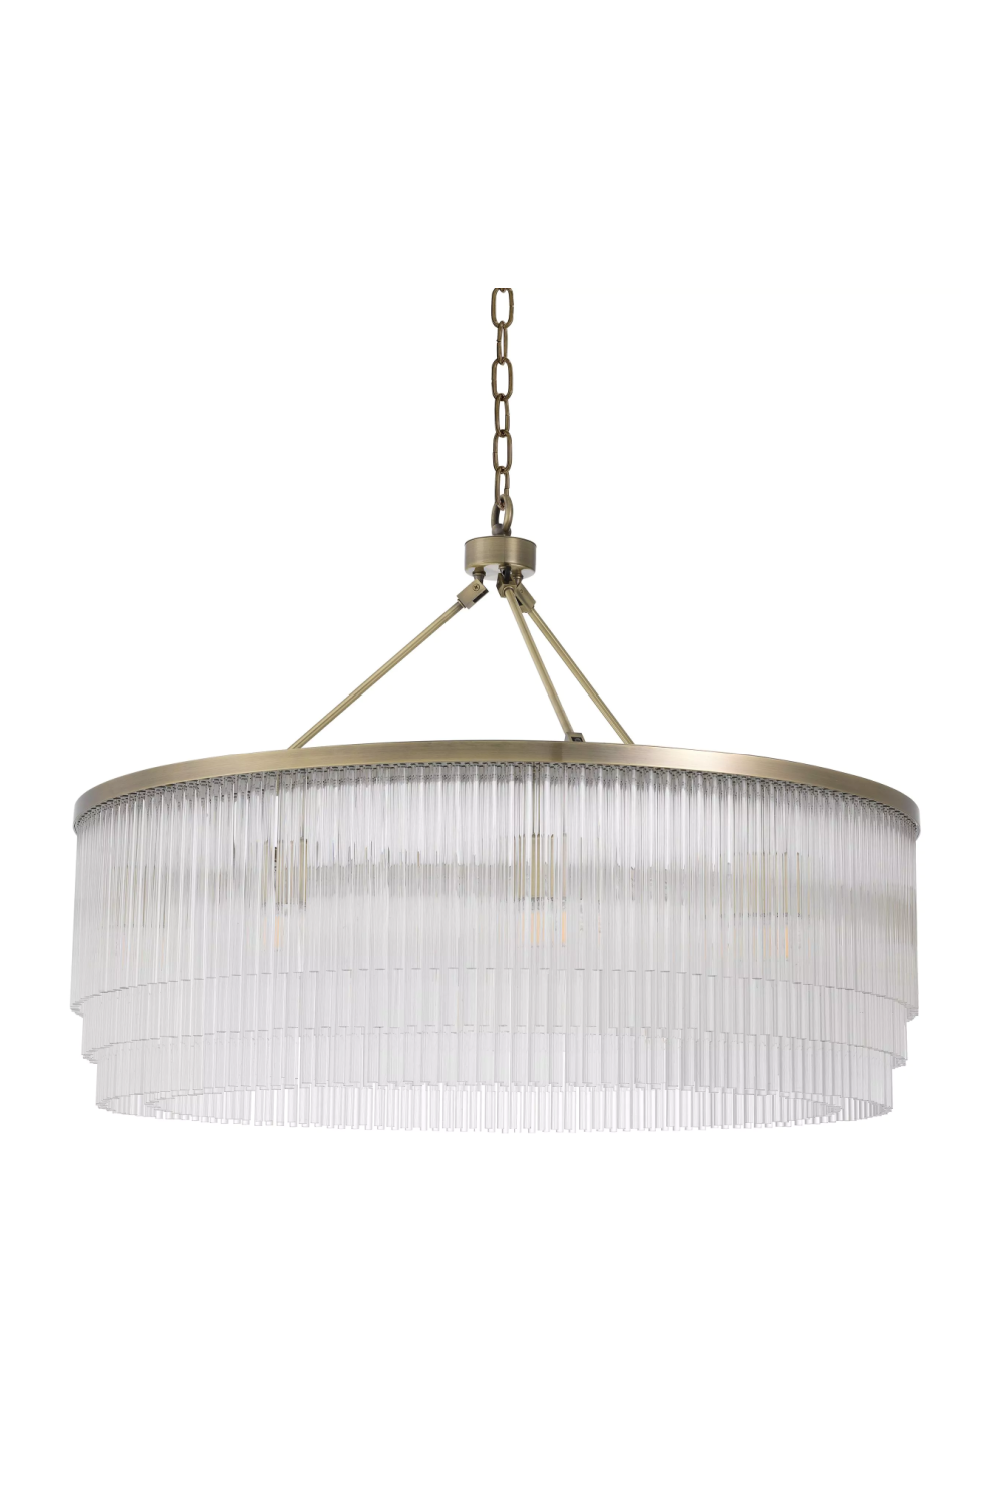 Glass Rods Contemporary Chandelier | Eichholtz Hector | OROA